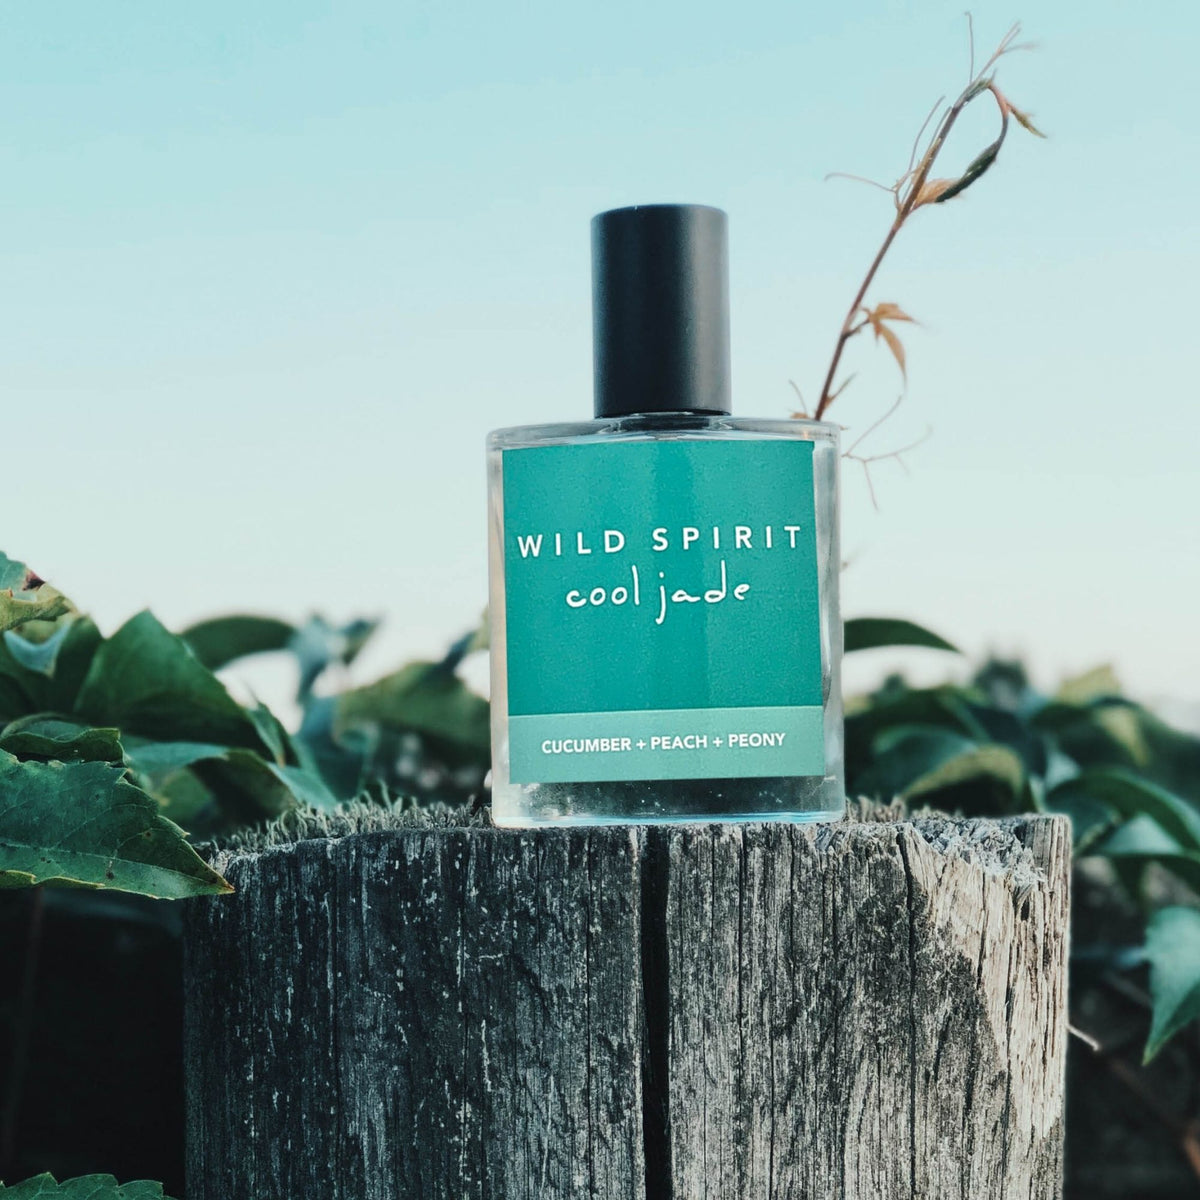 Cool Jade perfume: The scent of sunshine and summer with notes of cool cucumber, Georgia peach, and luscious peony petals.